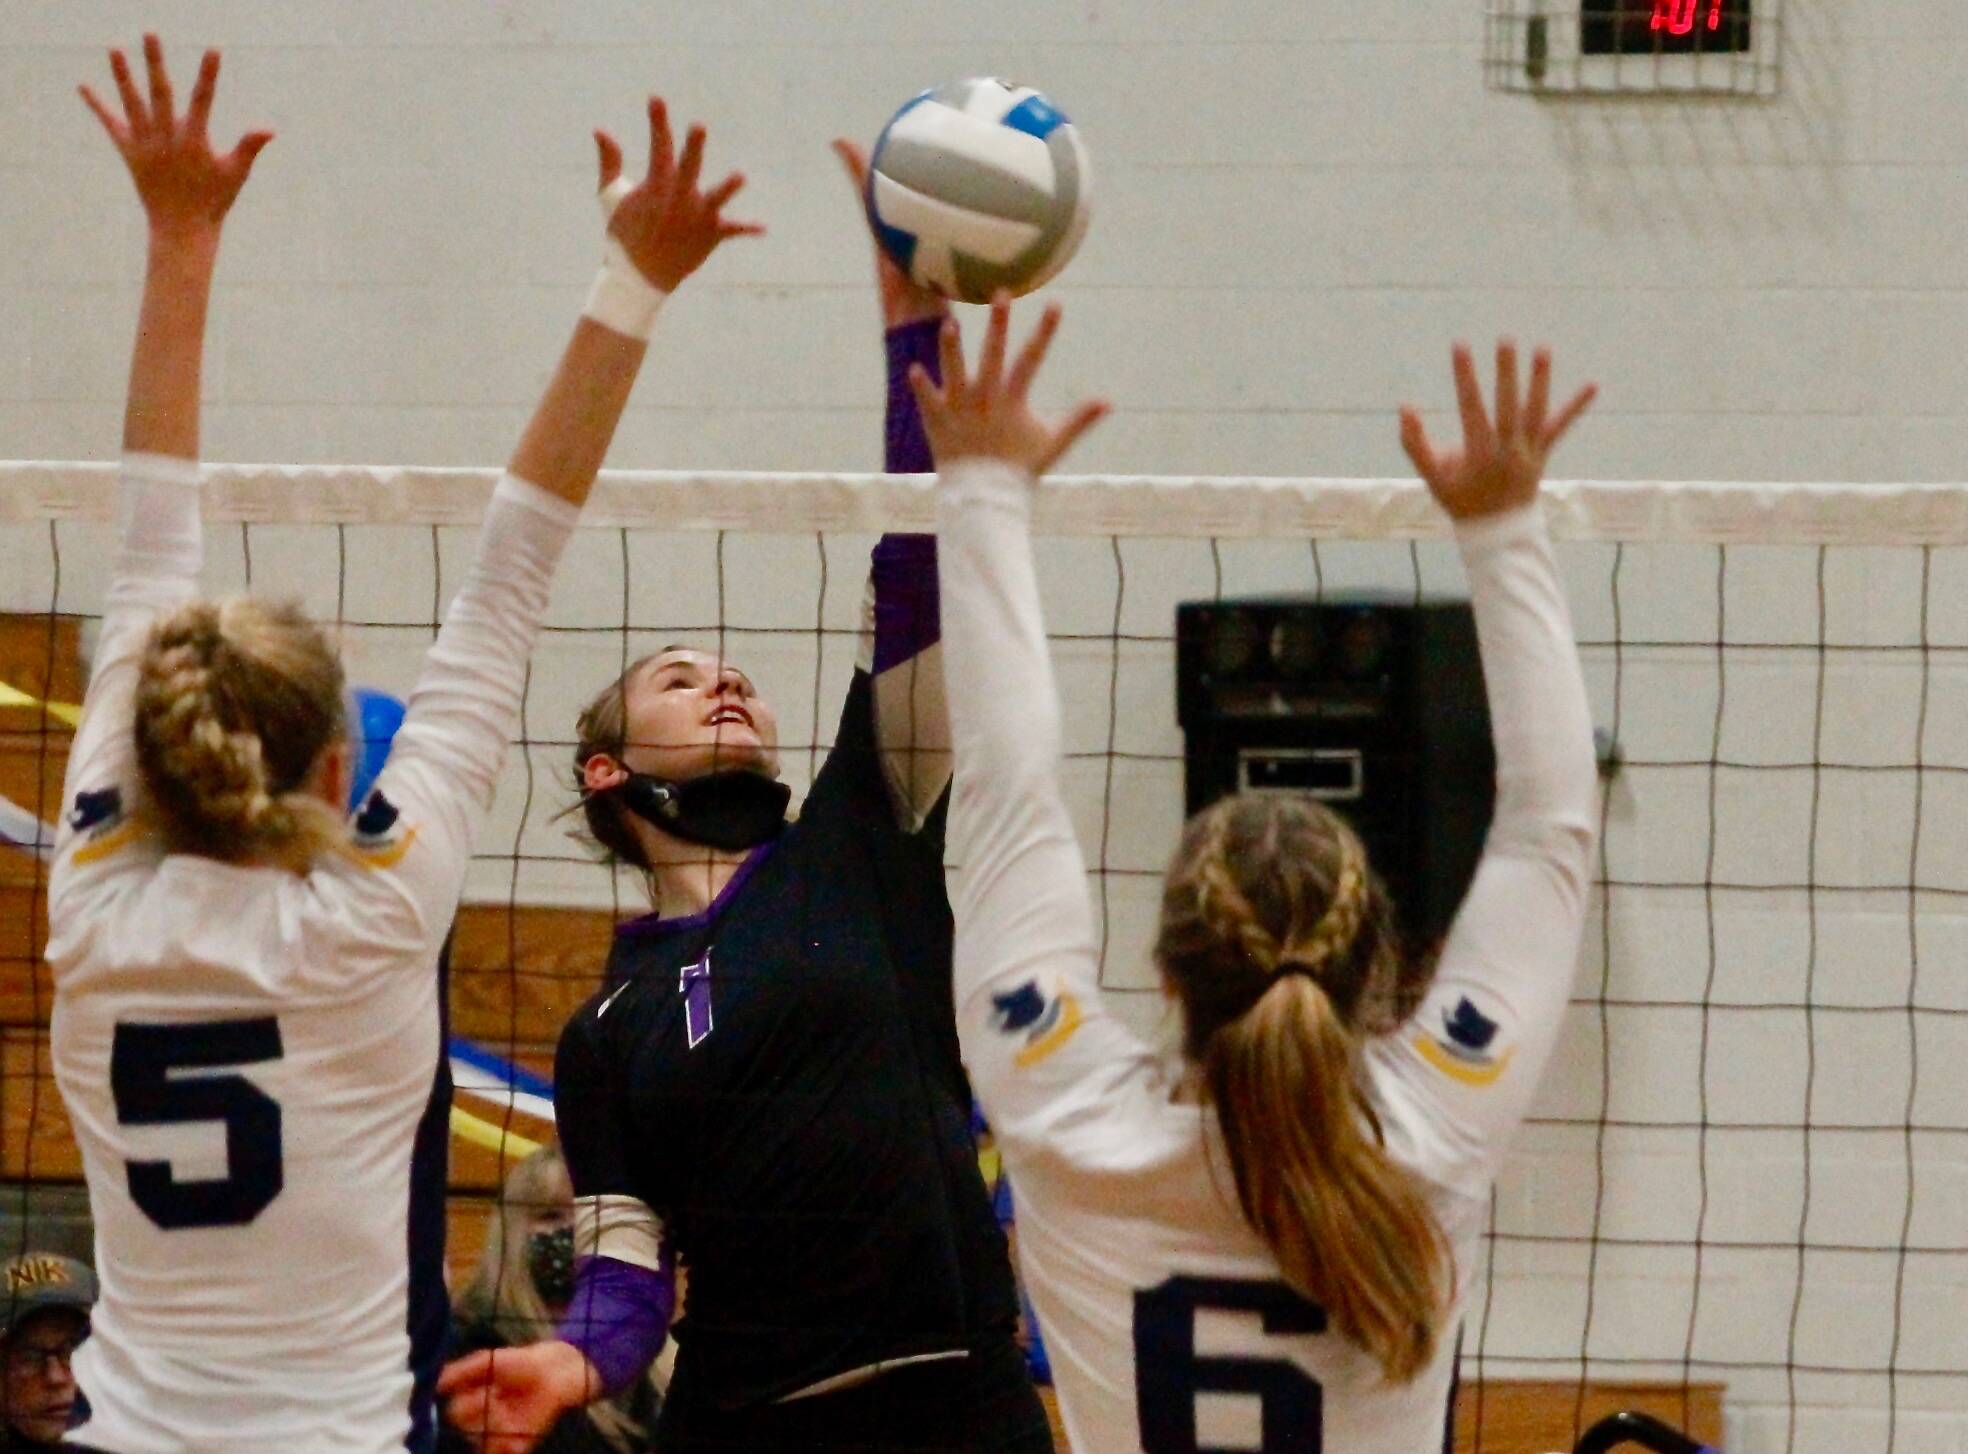 Lily Pruden was one of North Kitsap’s top hitters in her team’s win over Bainbridge. (Mark Krulish/Kitsap News Group)